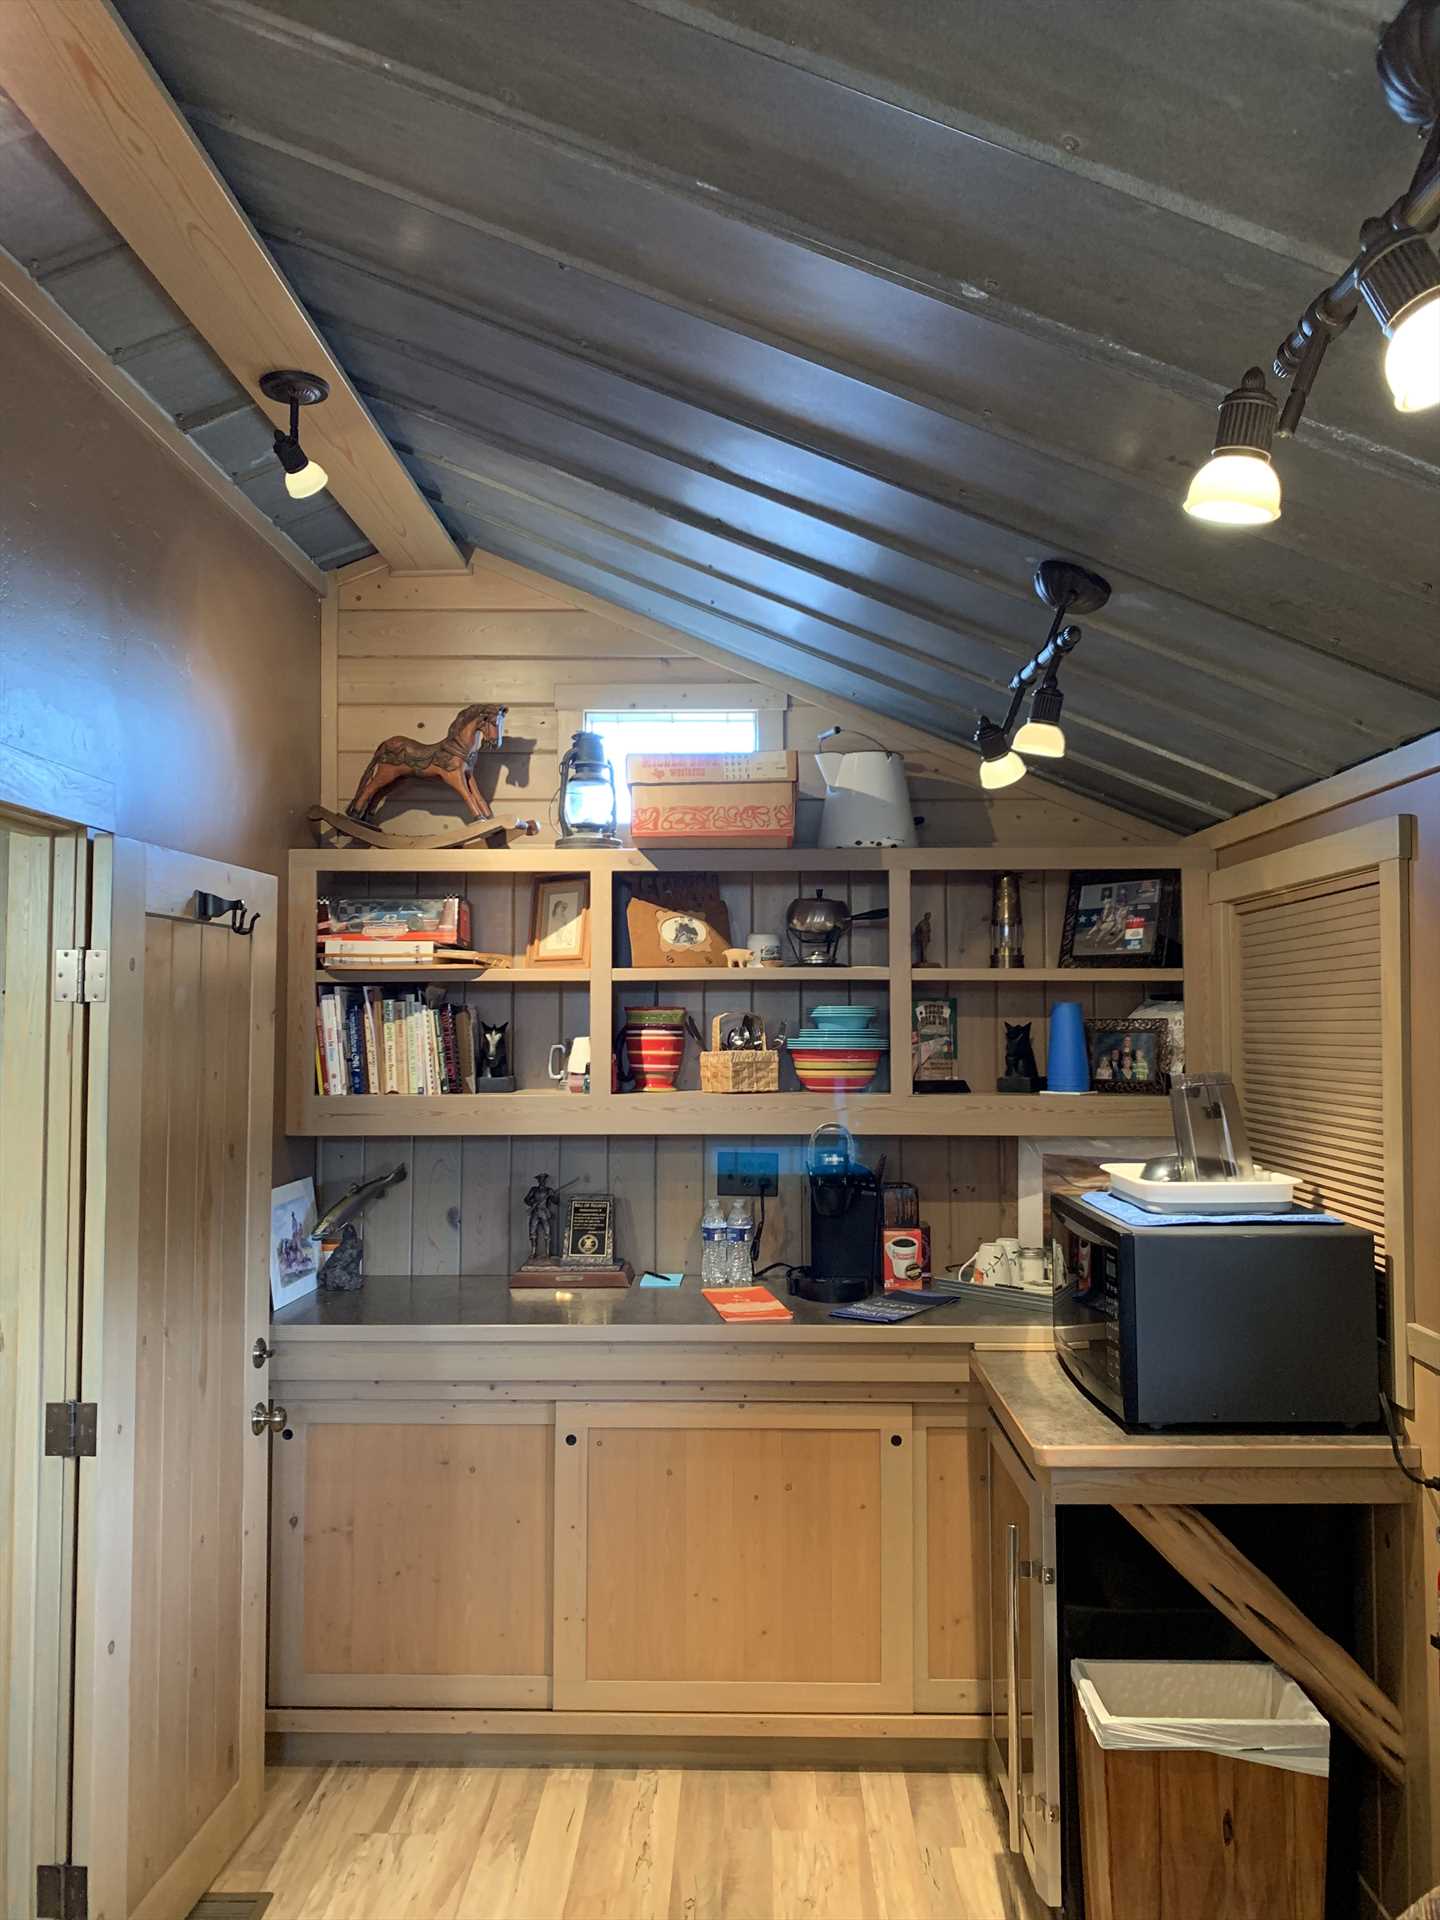                                                 Coffee basics, a microwave, and mini fridge round out the cozy kitchenette. For more cooking space, check out the shared pavilion!